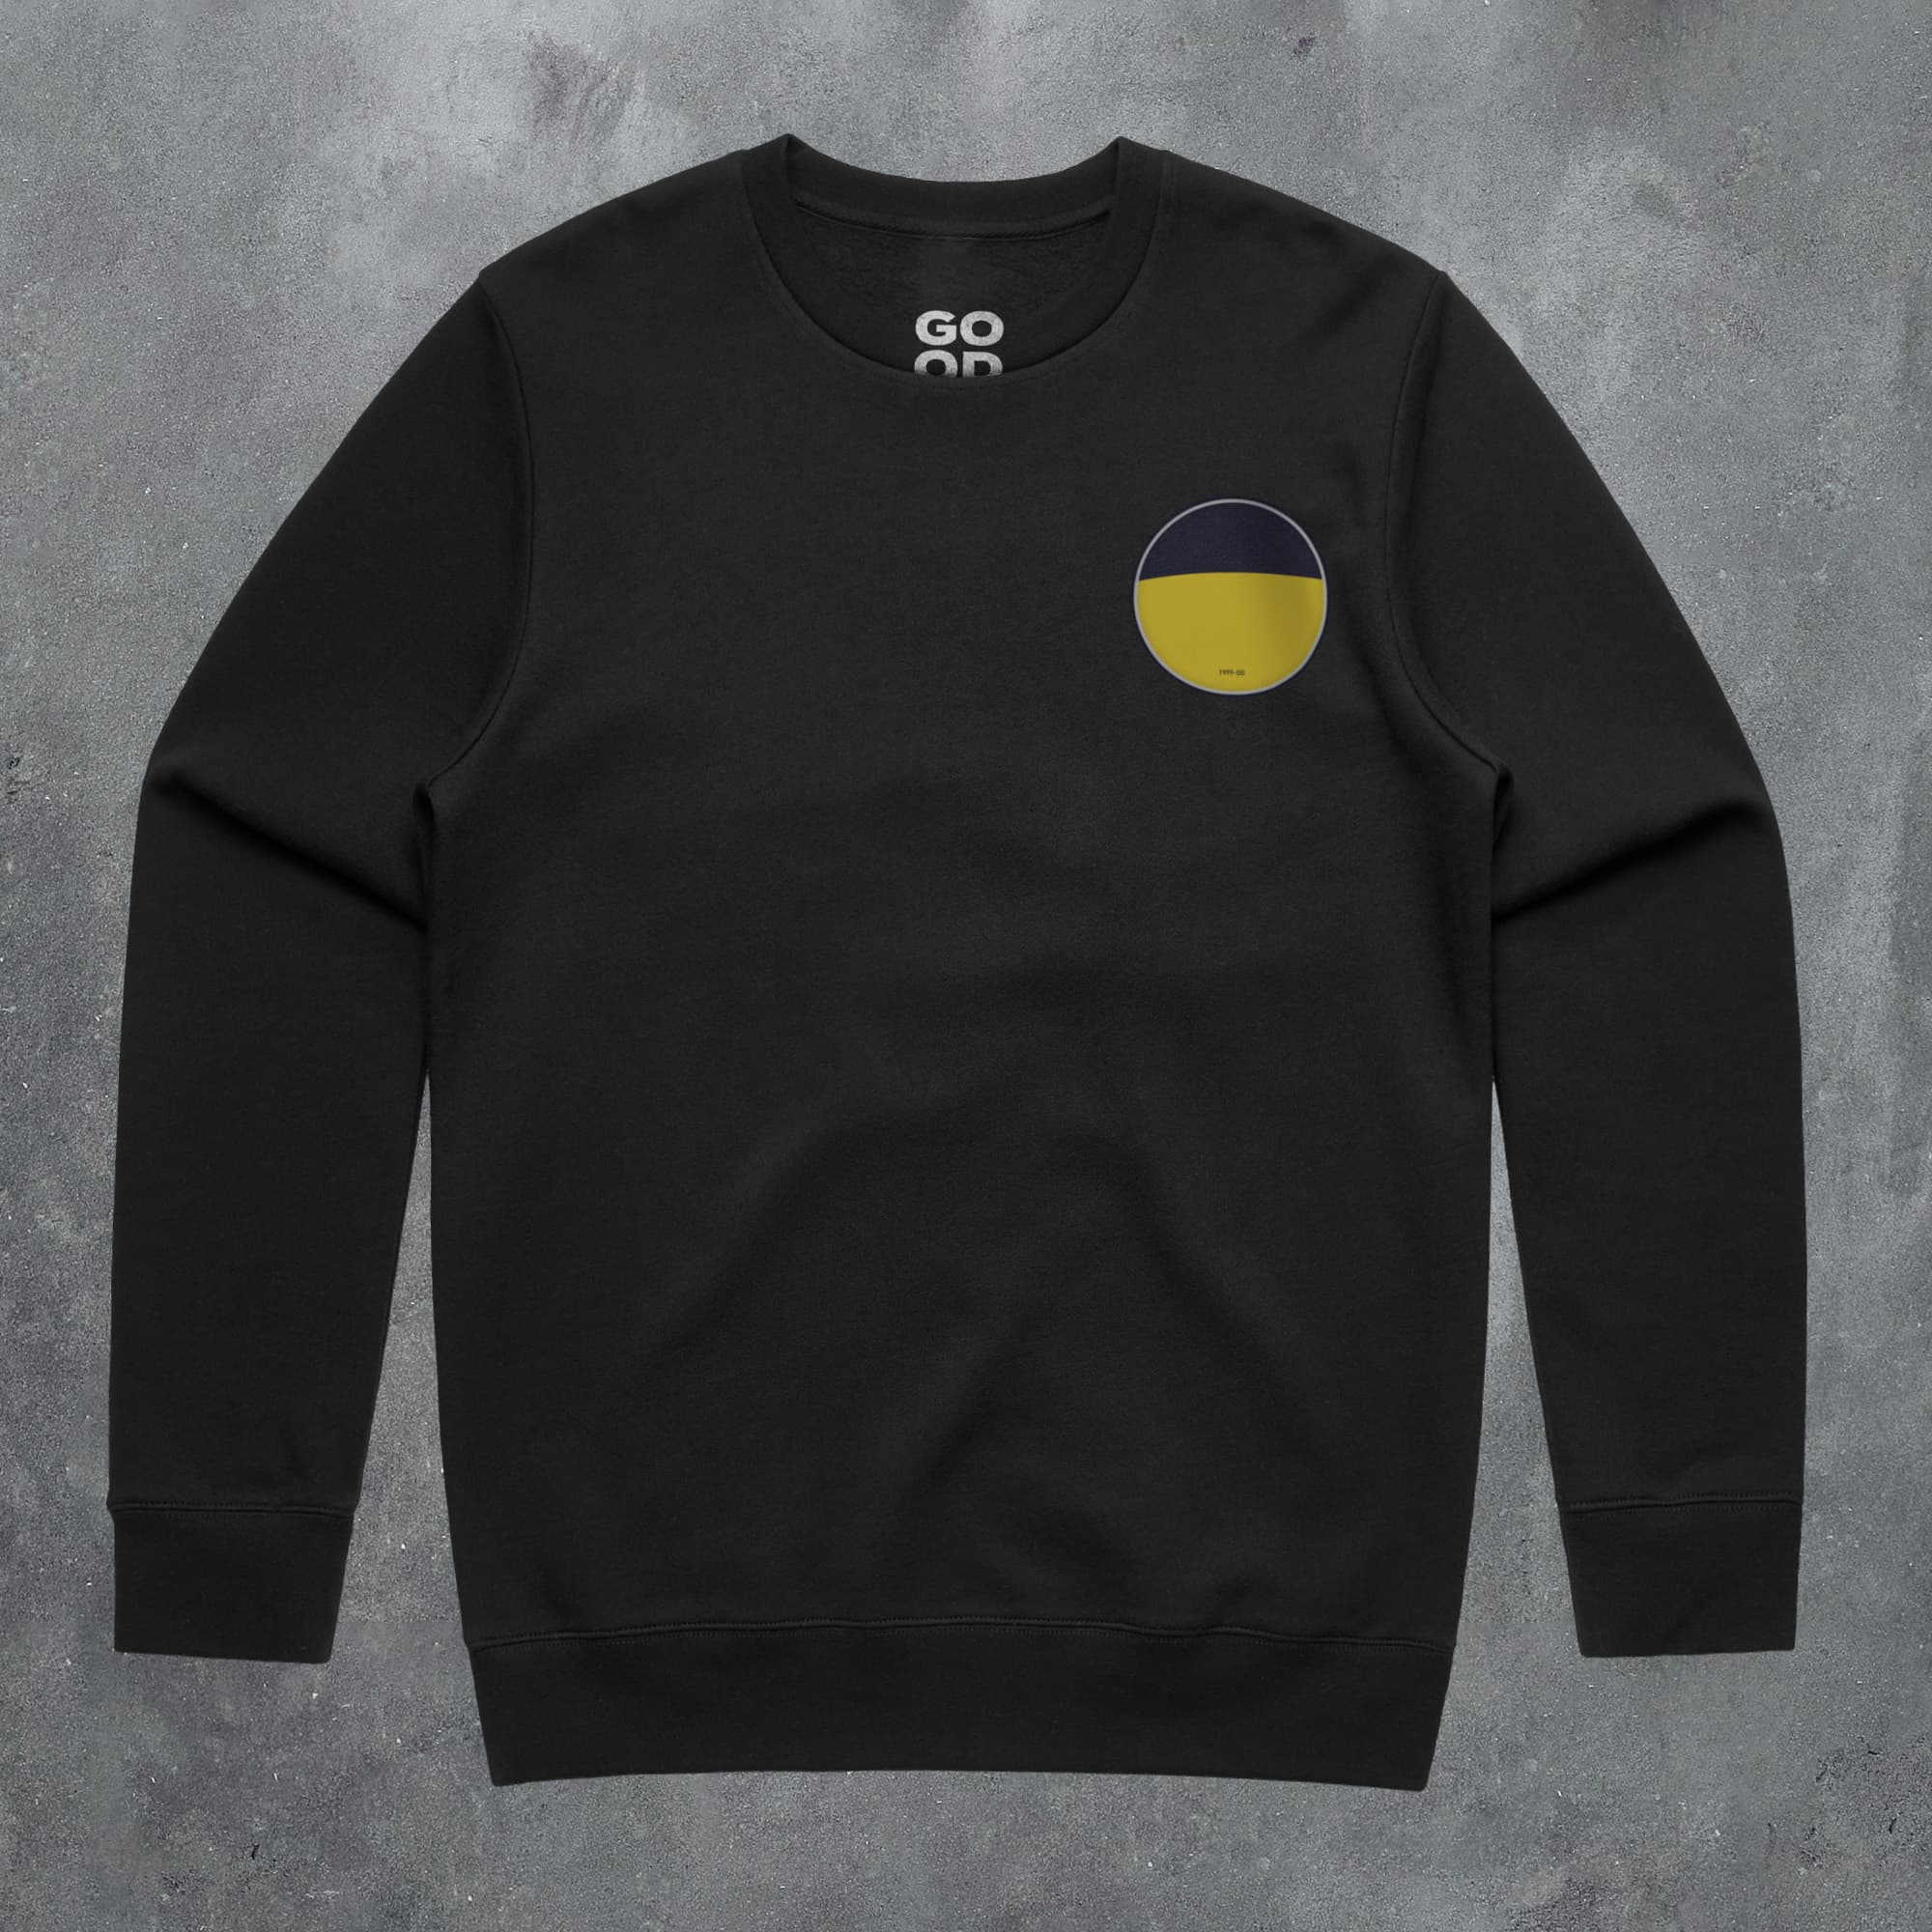 a black sweatshirt with a yellow circle on the chest